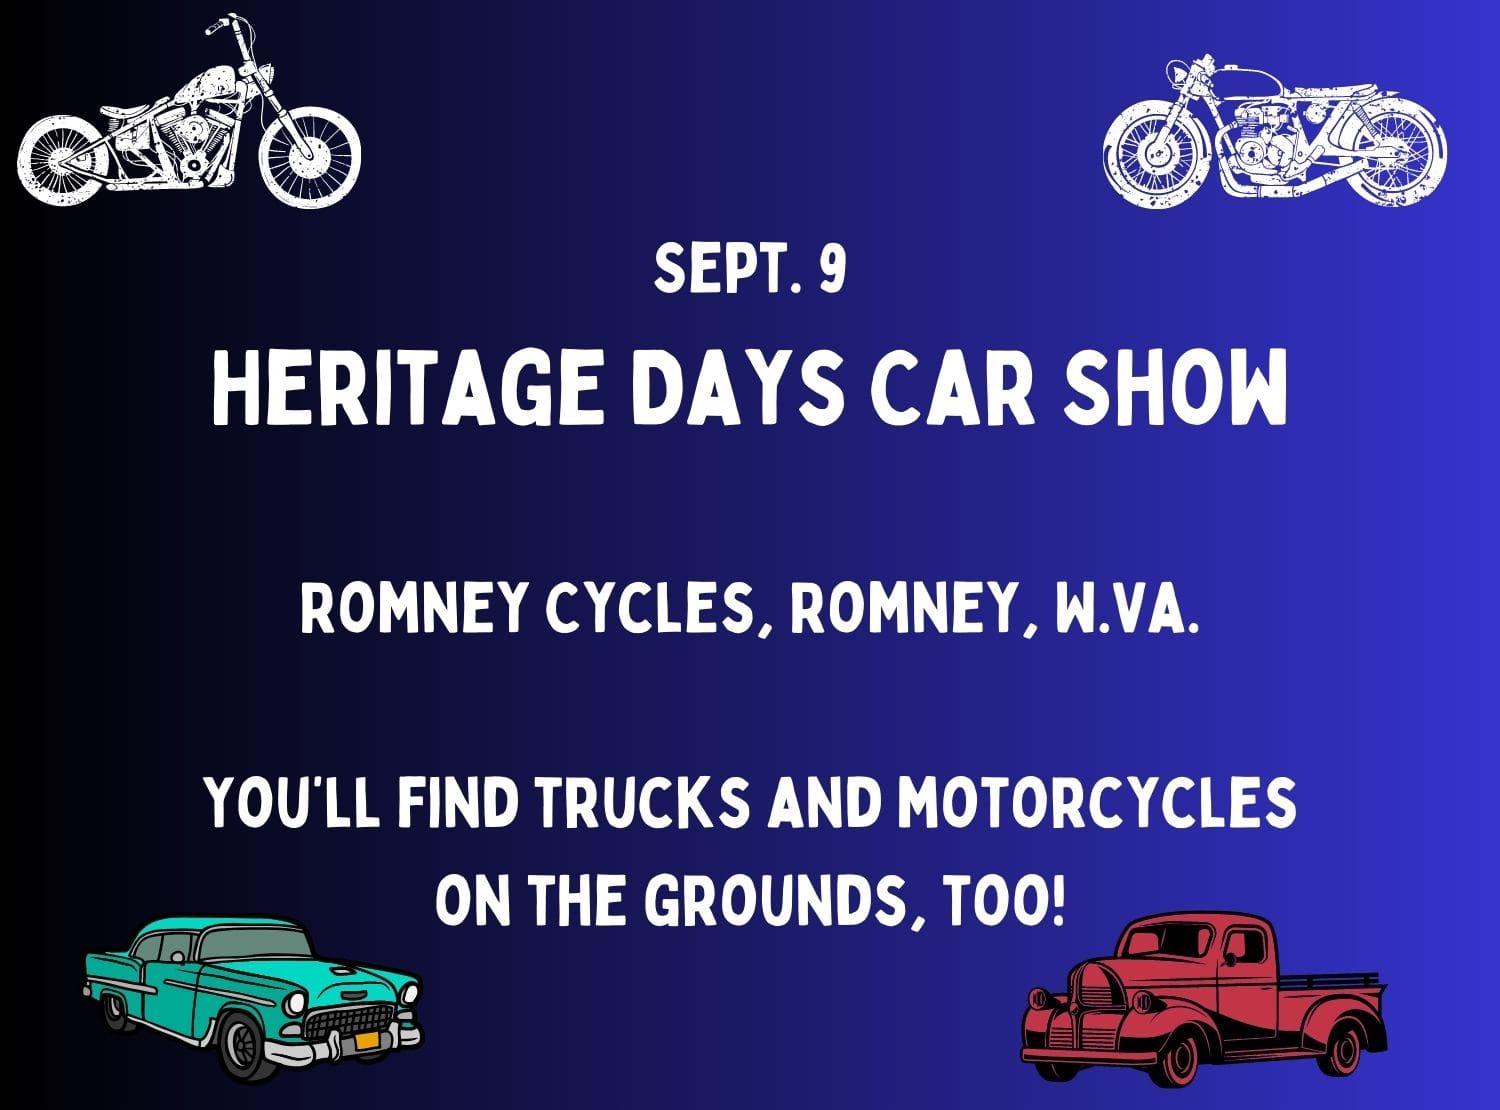 Heritage Days Car Show Come to Hampshire